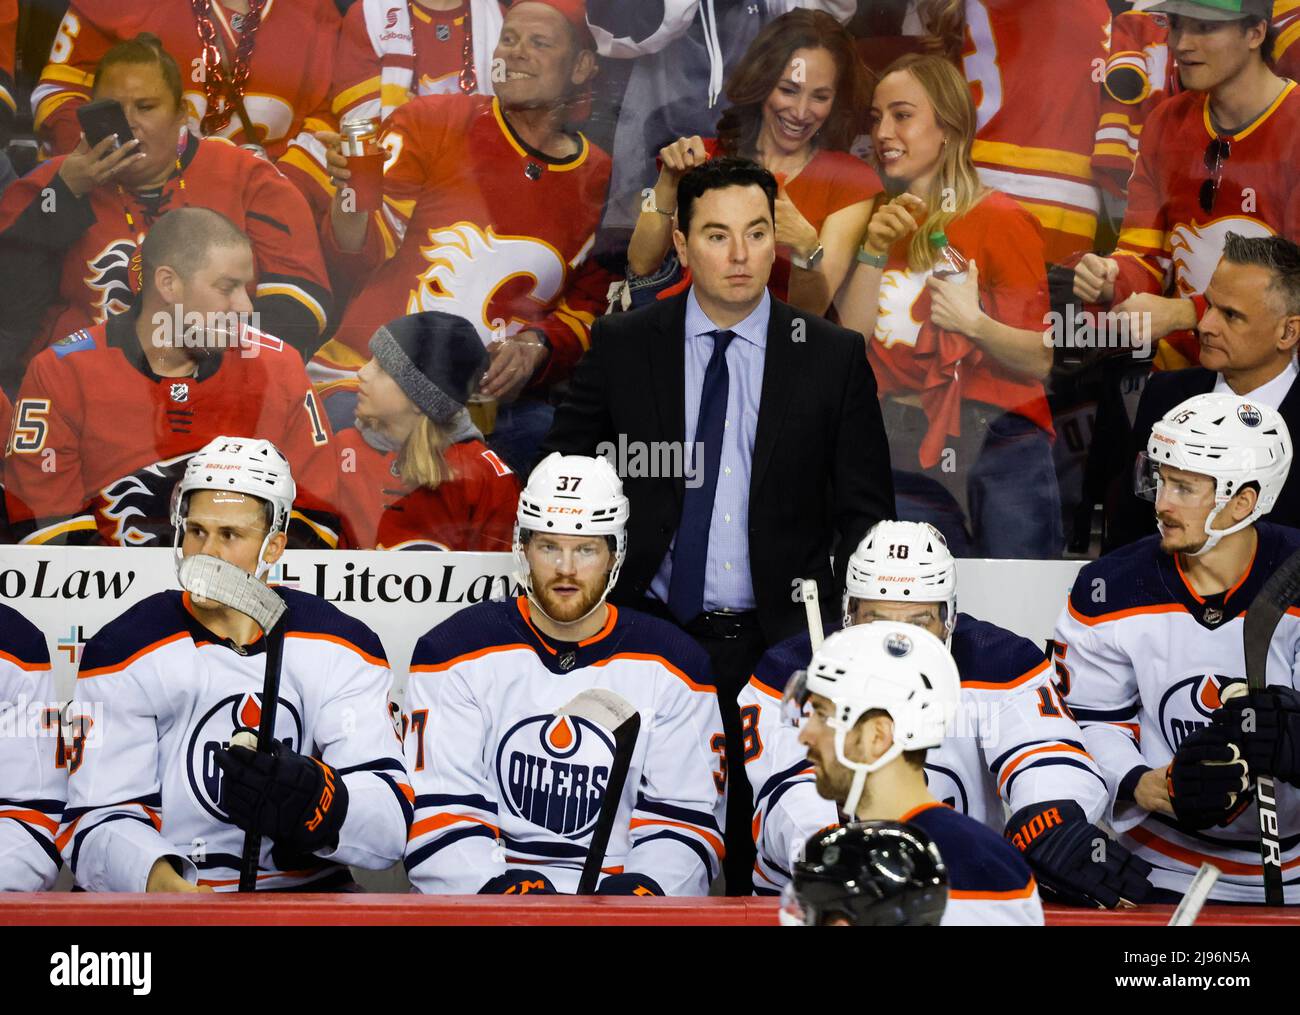 2022 NHL playoff preview: Flames vs. Oilers - The Athletic